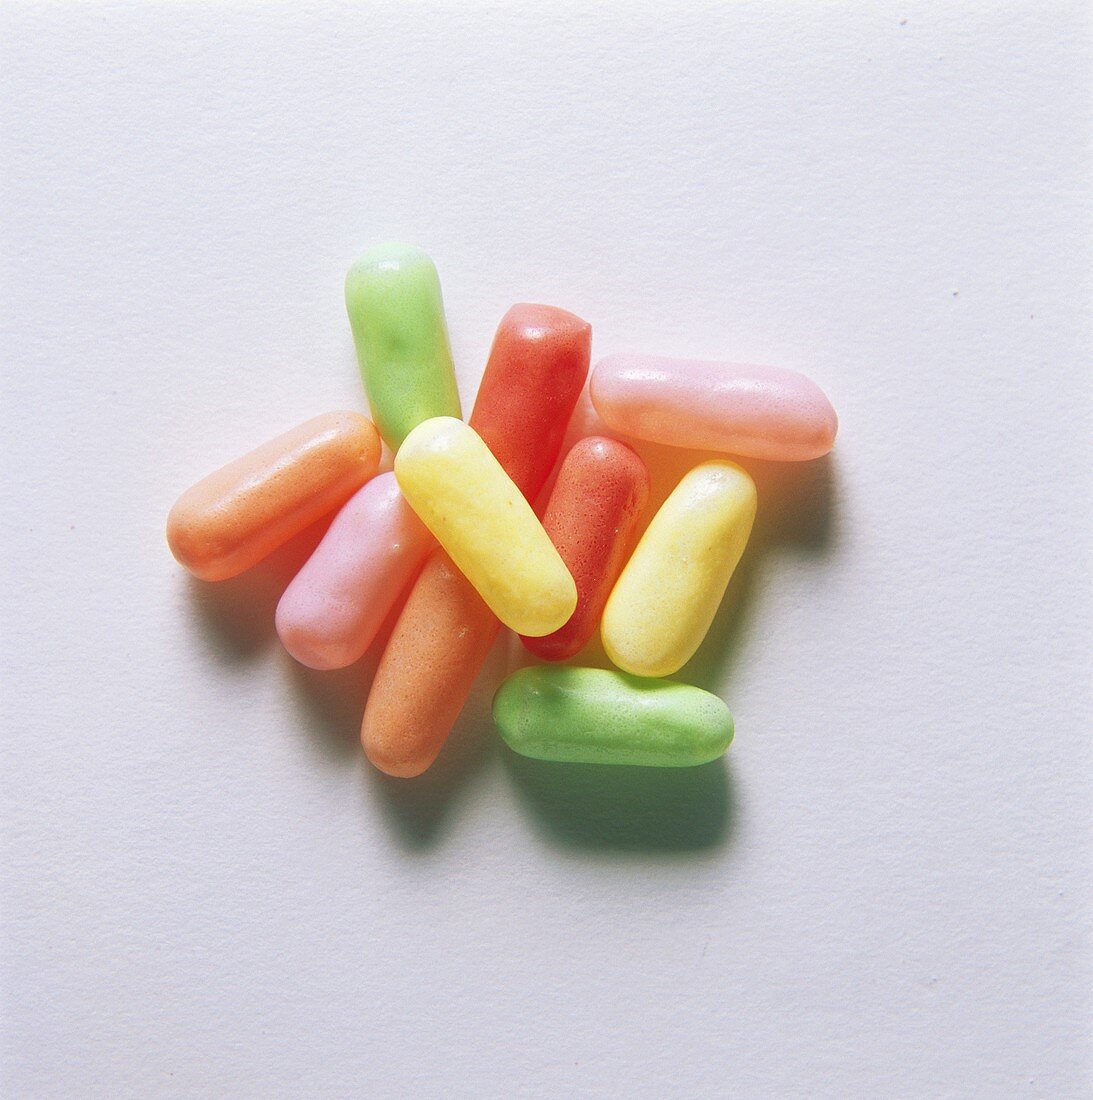 A heap of different-coloured, oblong sweets